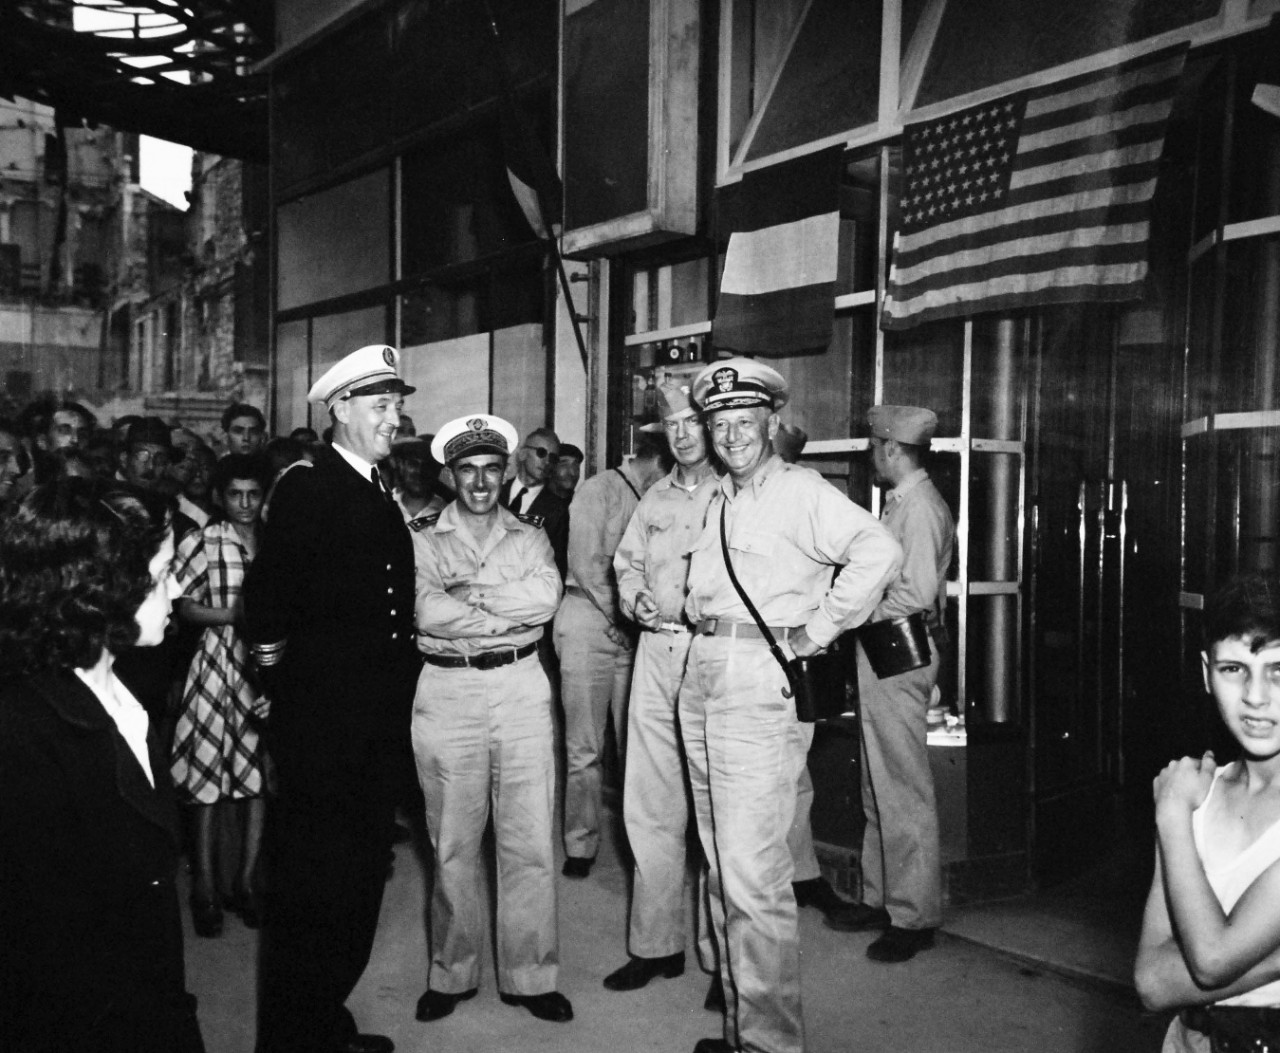 80-G-364090:   Invasion of Southern France, Marseille, August 1944.   Vice Admiral H. Kent Hewitt, USN, visits U.S. Navy Headquarters in Marseille, France.  Shown, left to right:   Captain Sticca; Rear Admiral A. Lemonnier, Commander Leonard Doughty, USN, and Vice Admiral H. Kent Hewitt, 3 September 1944.  Taken by crew of USS Catoctin (AGC-5).    Official U.S. Navy Photograph, now in the collections of the National Archives.  (2014/7/10).